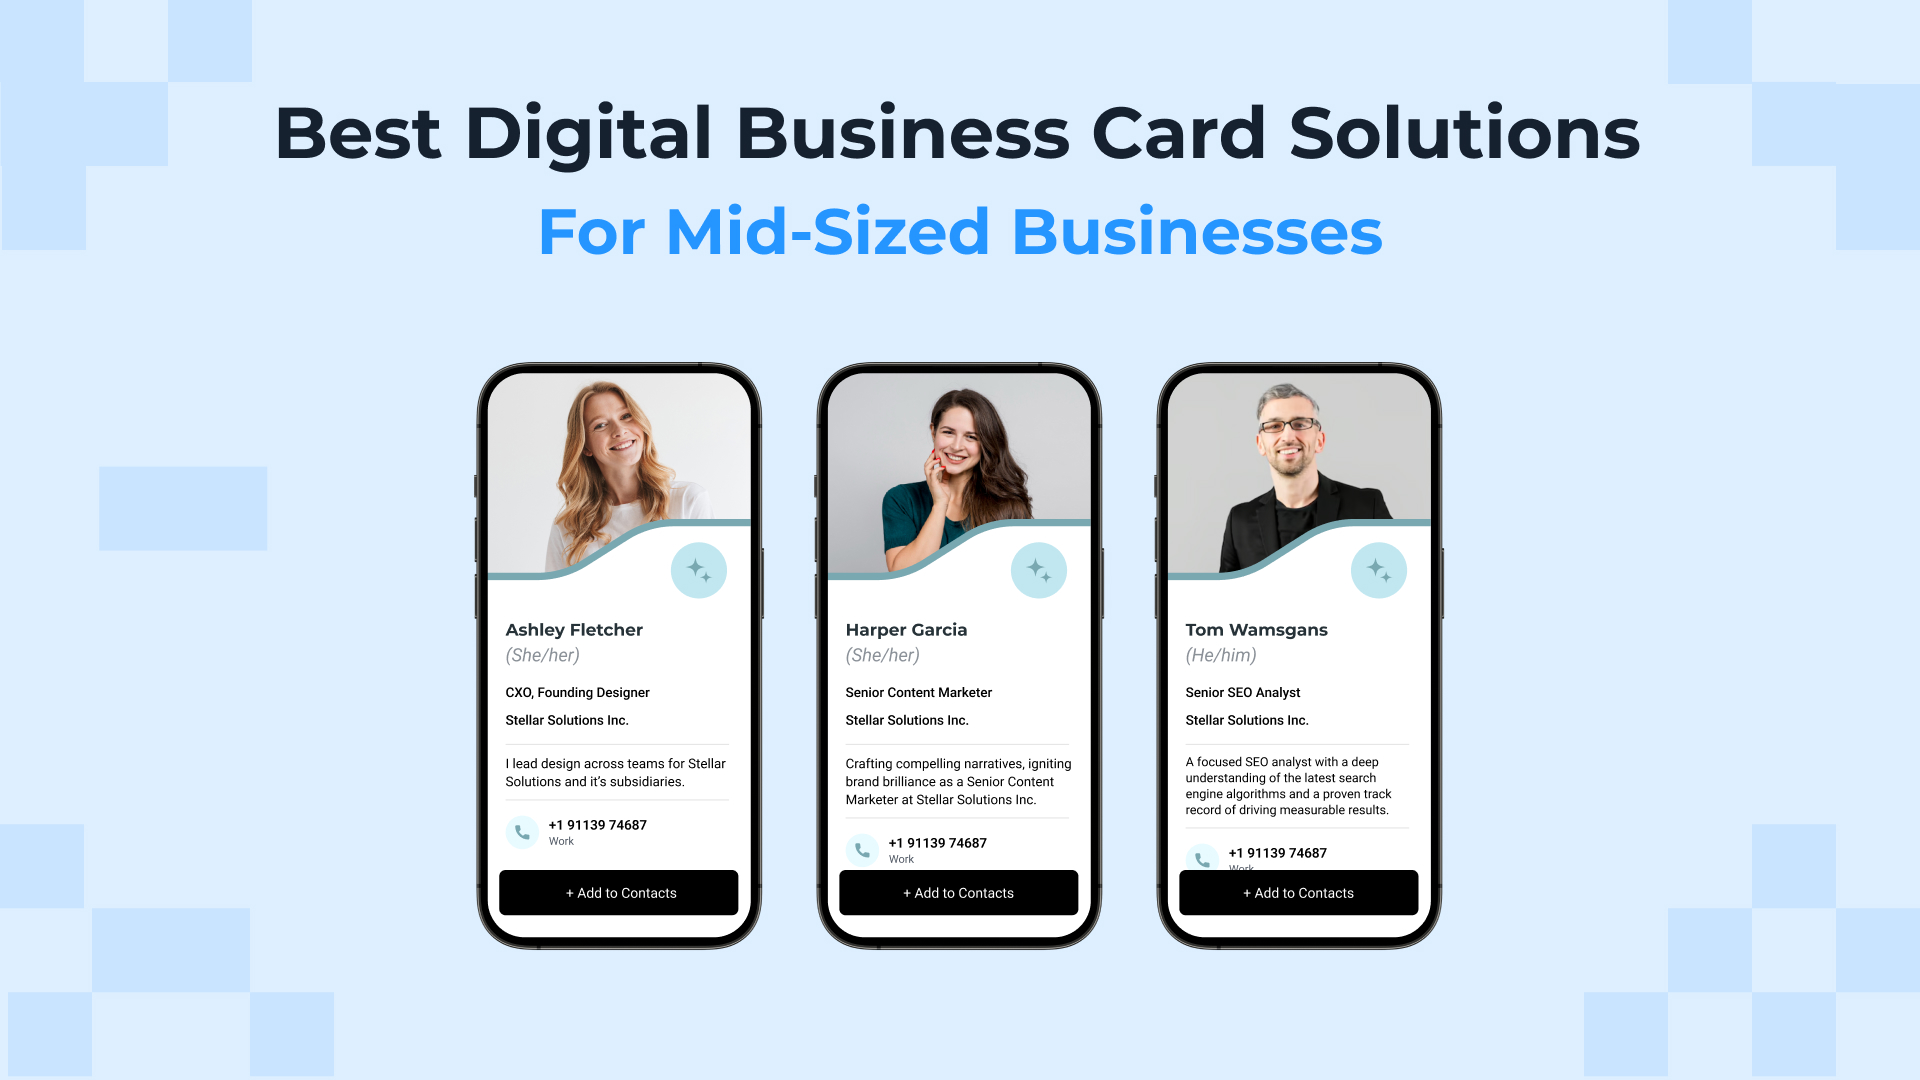 The 5 Best Digital Business Card Solutions for Mid-Sized Businesses in 2023: Compare and Decide